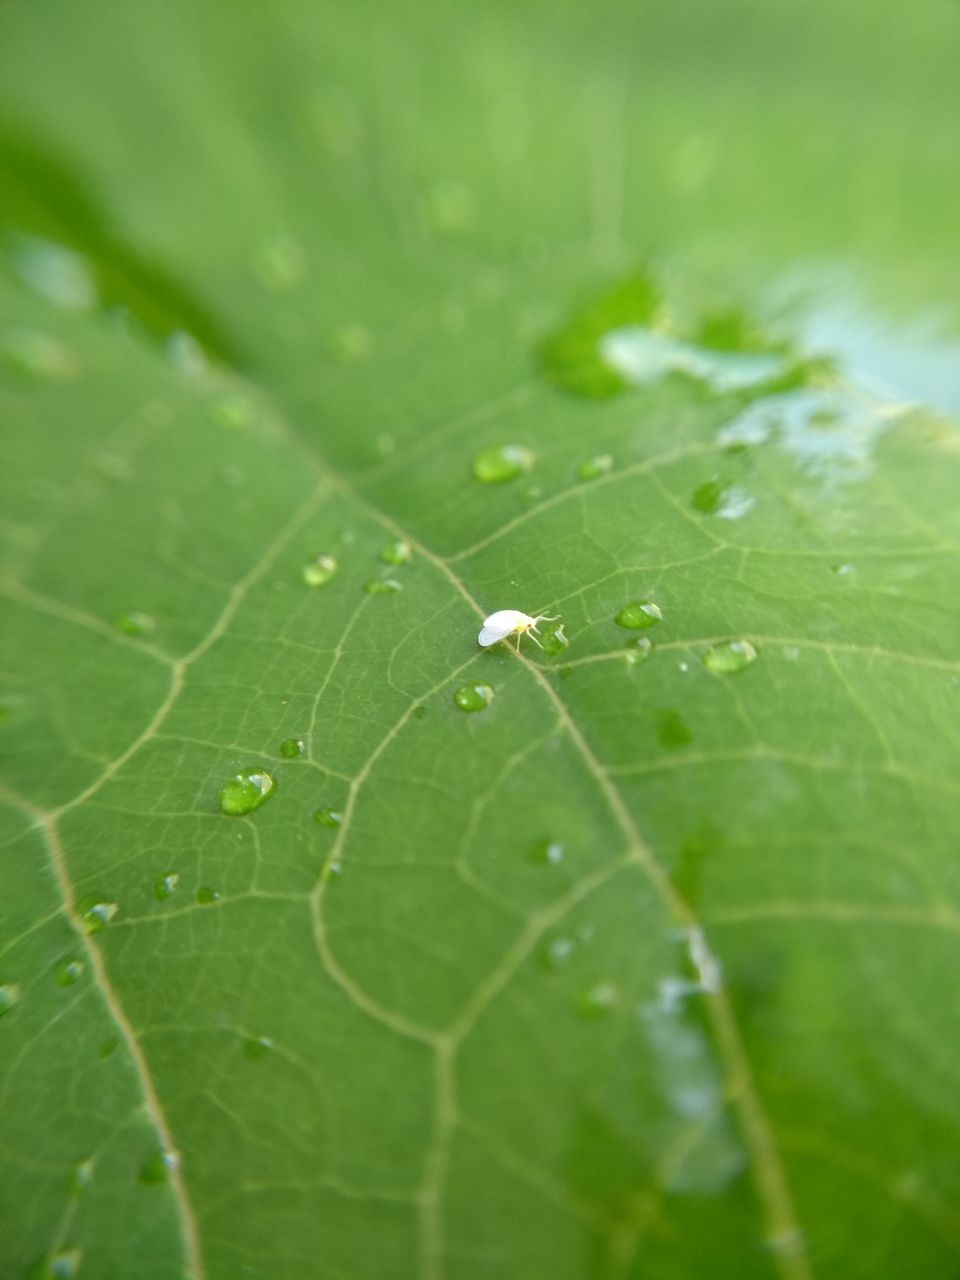 green color, leaf, plant part, plant, nature, close-up, beauty in nature, growth, leaf vein, fragility, no people, vulnerability, day, drop, selective focus, water, outdoors, freshness, wet, leaves, dew